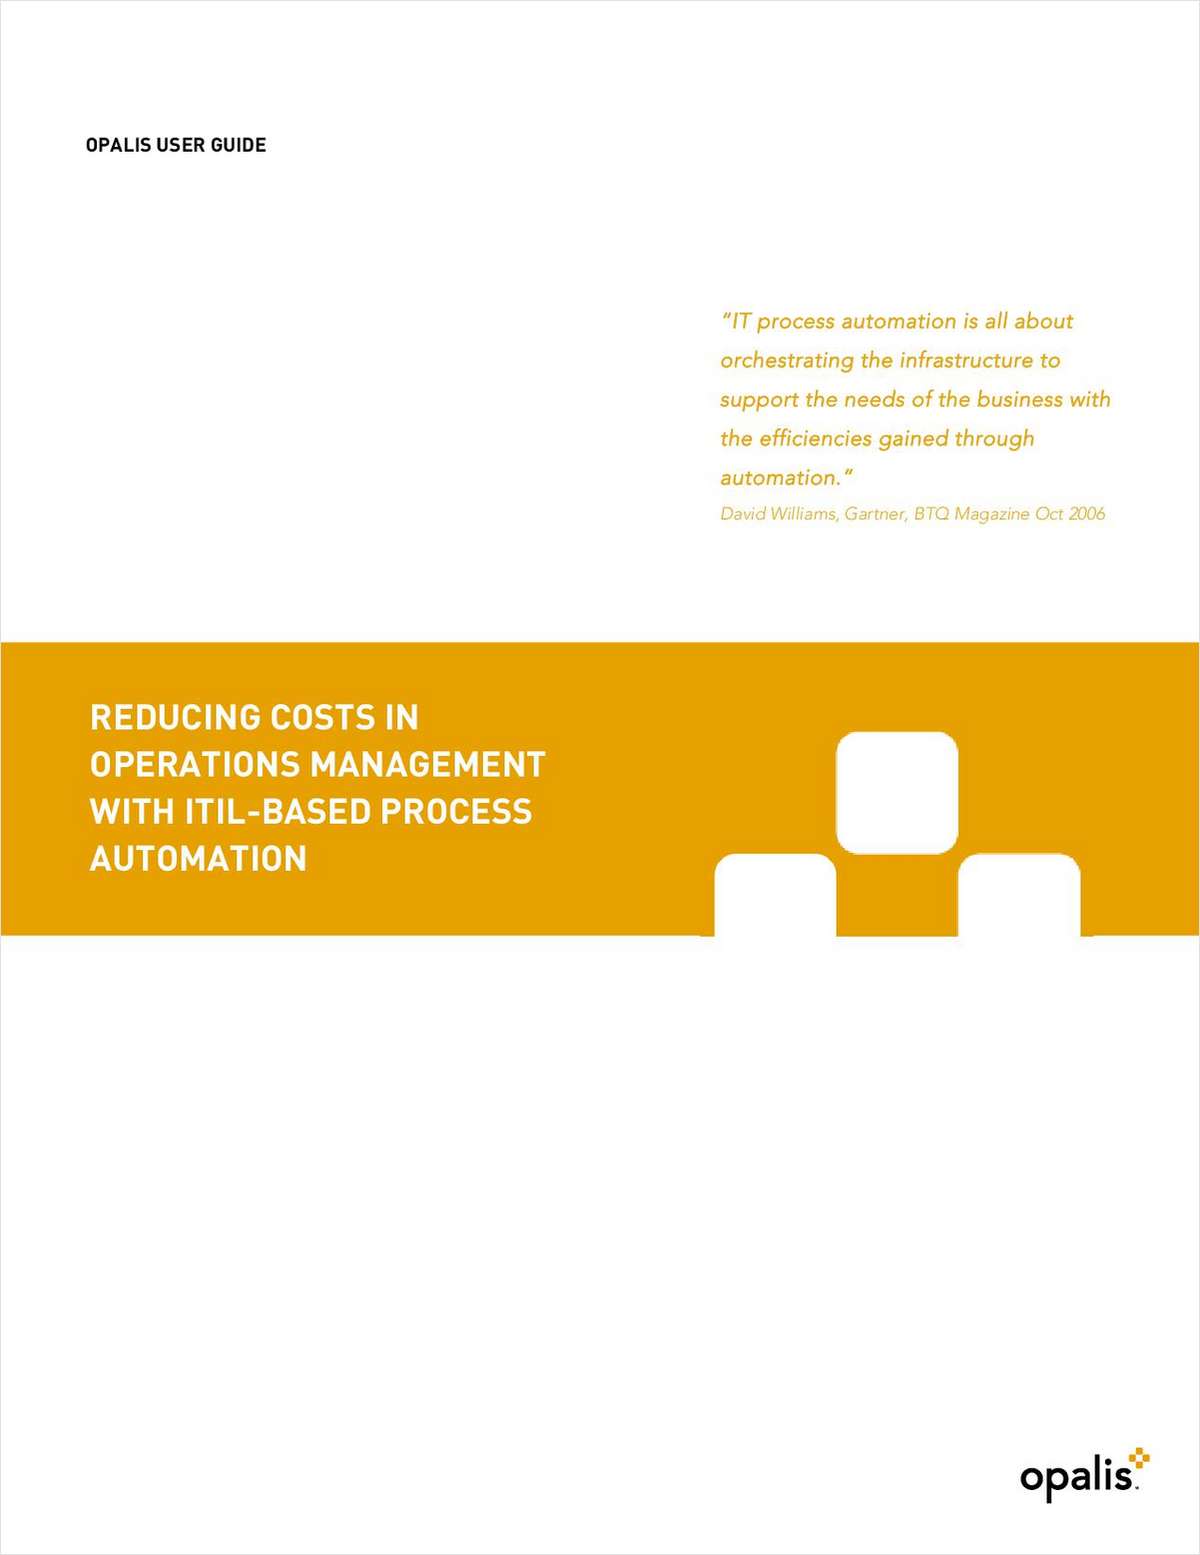 Reducing Costs in Operations Management with ITIL-Based Process Automation